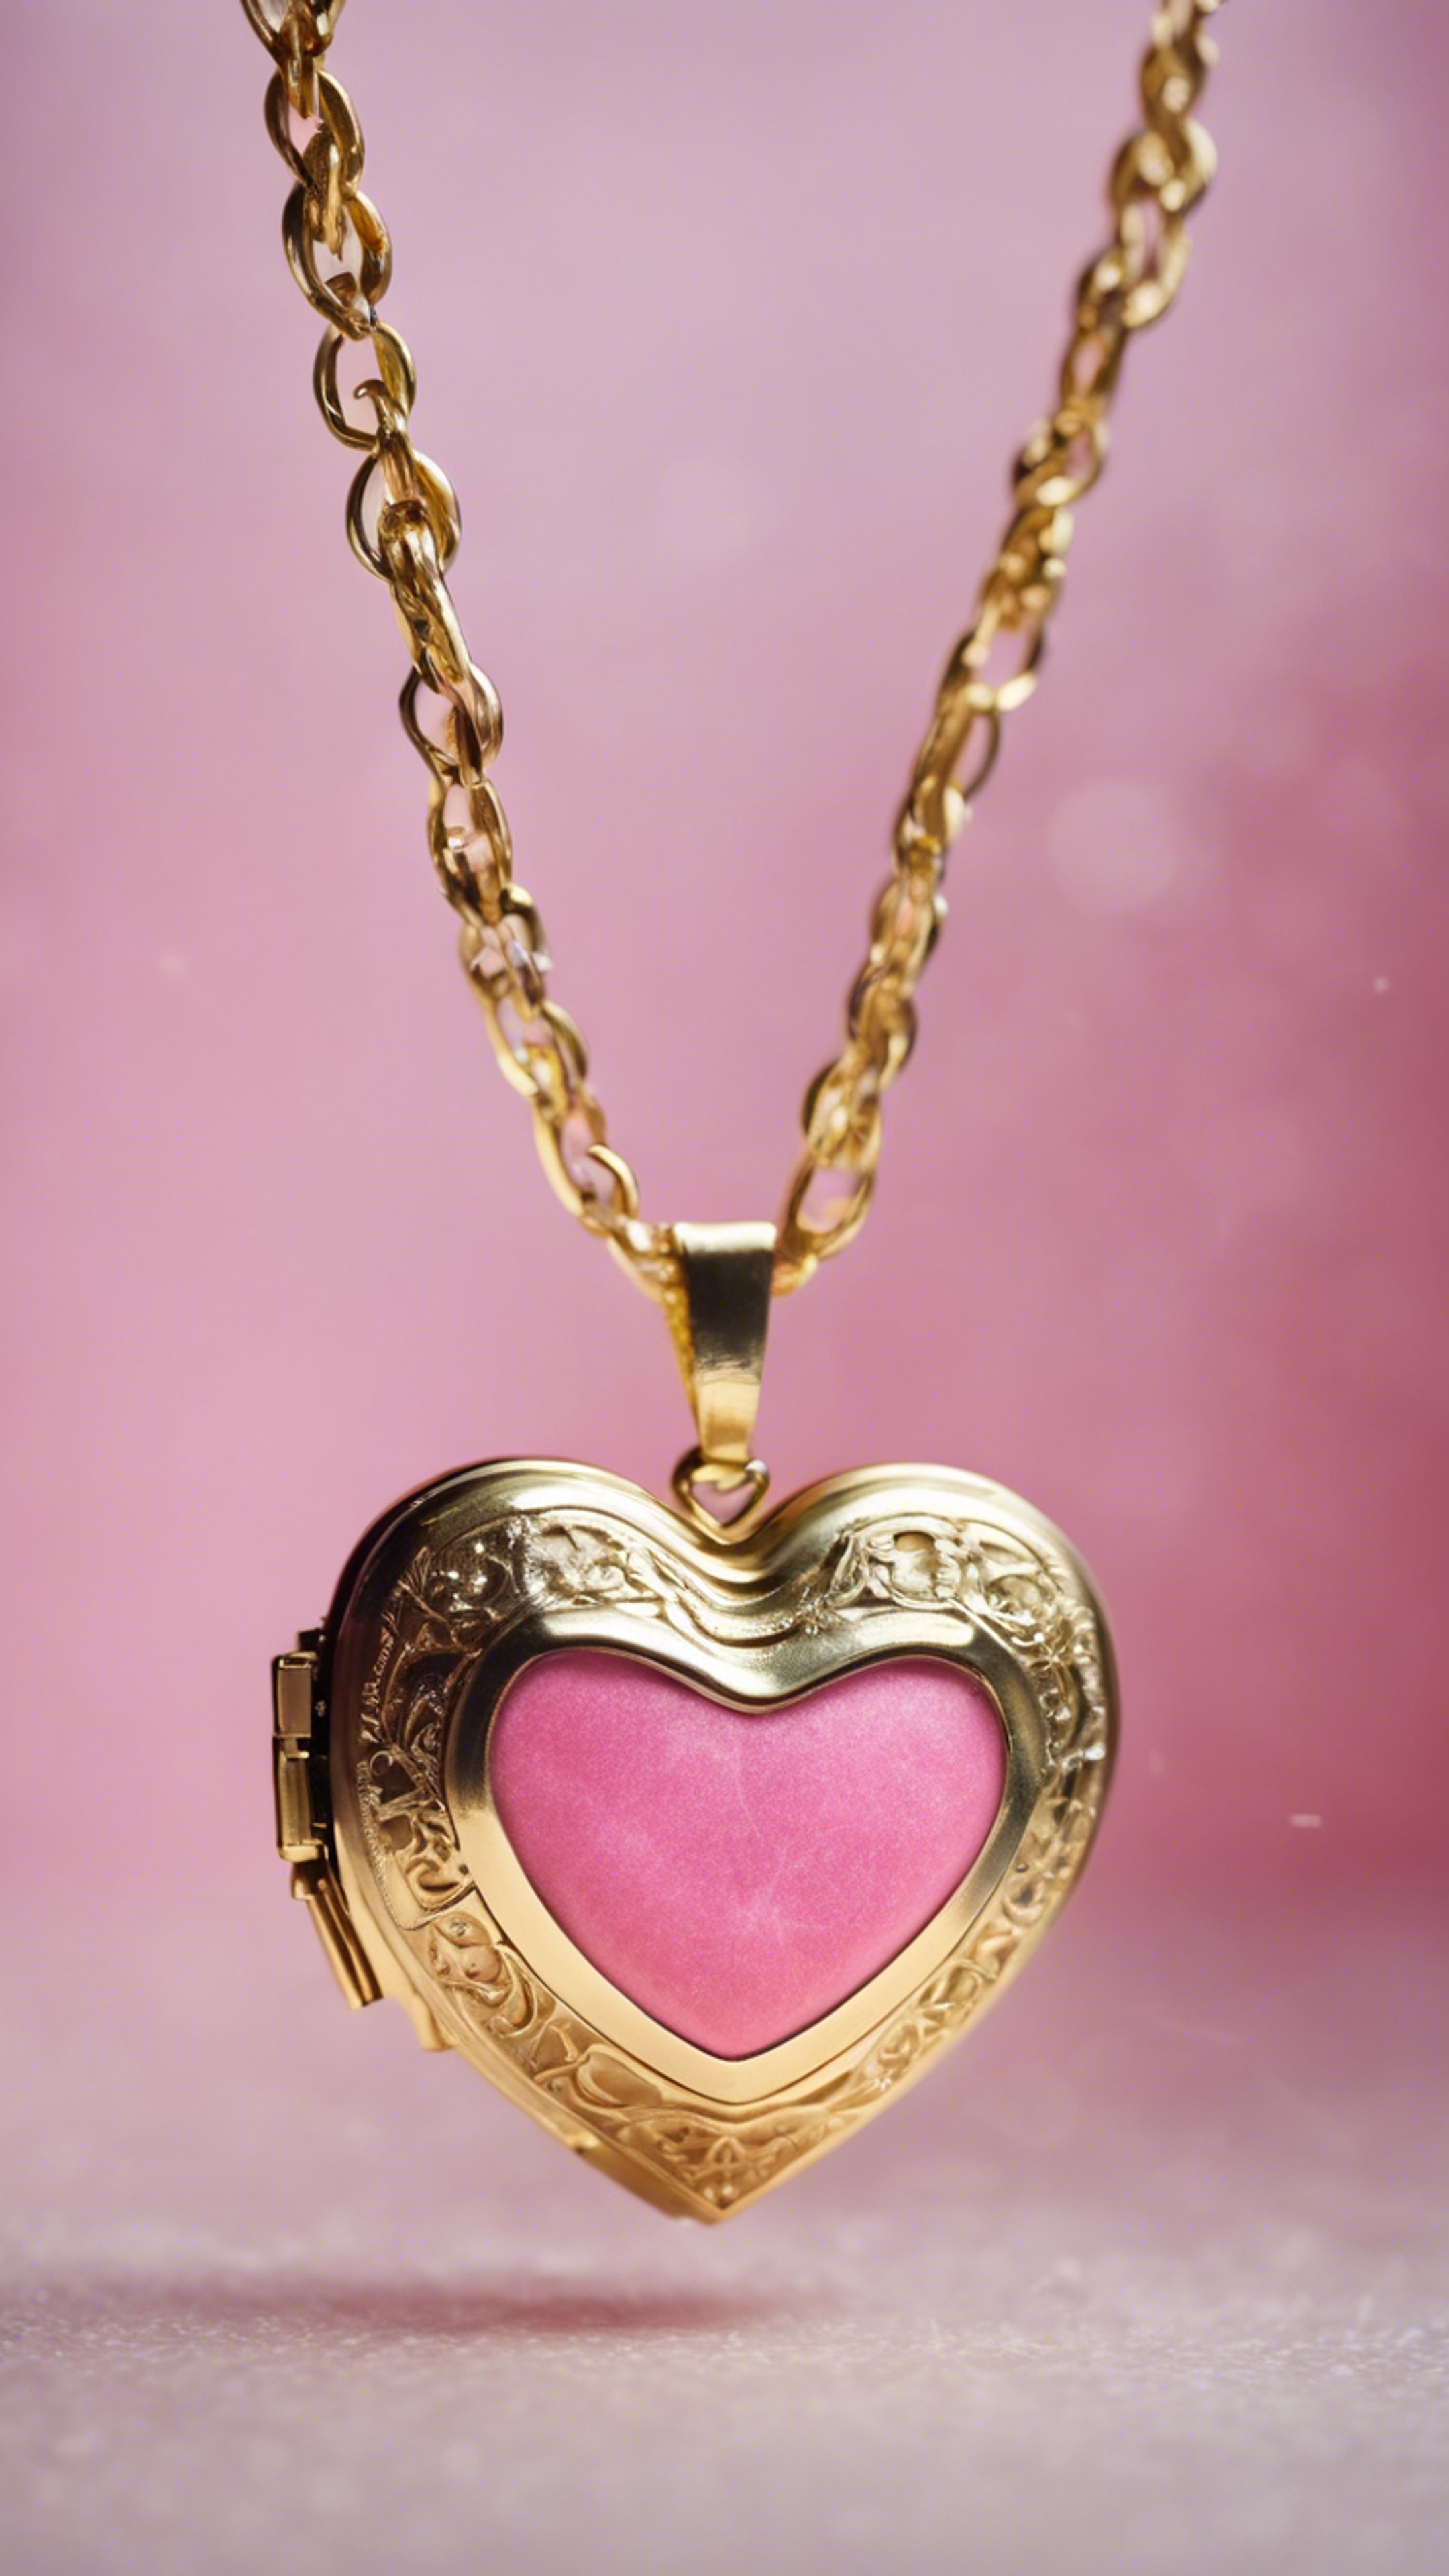 A pink heart shaped locket with a golden chain.壁紙[1bc2849041704351966a]